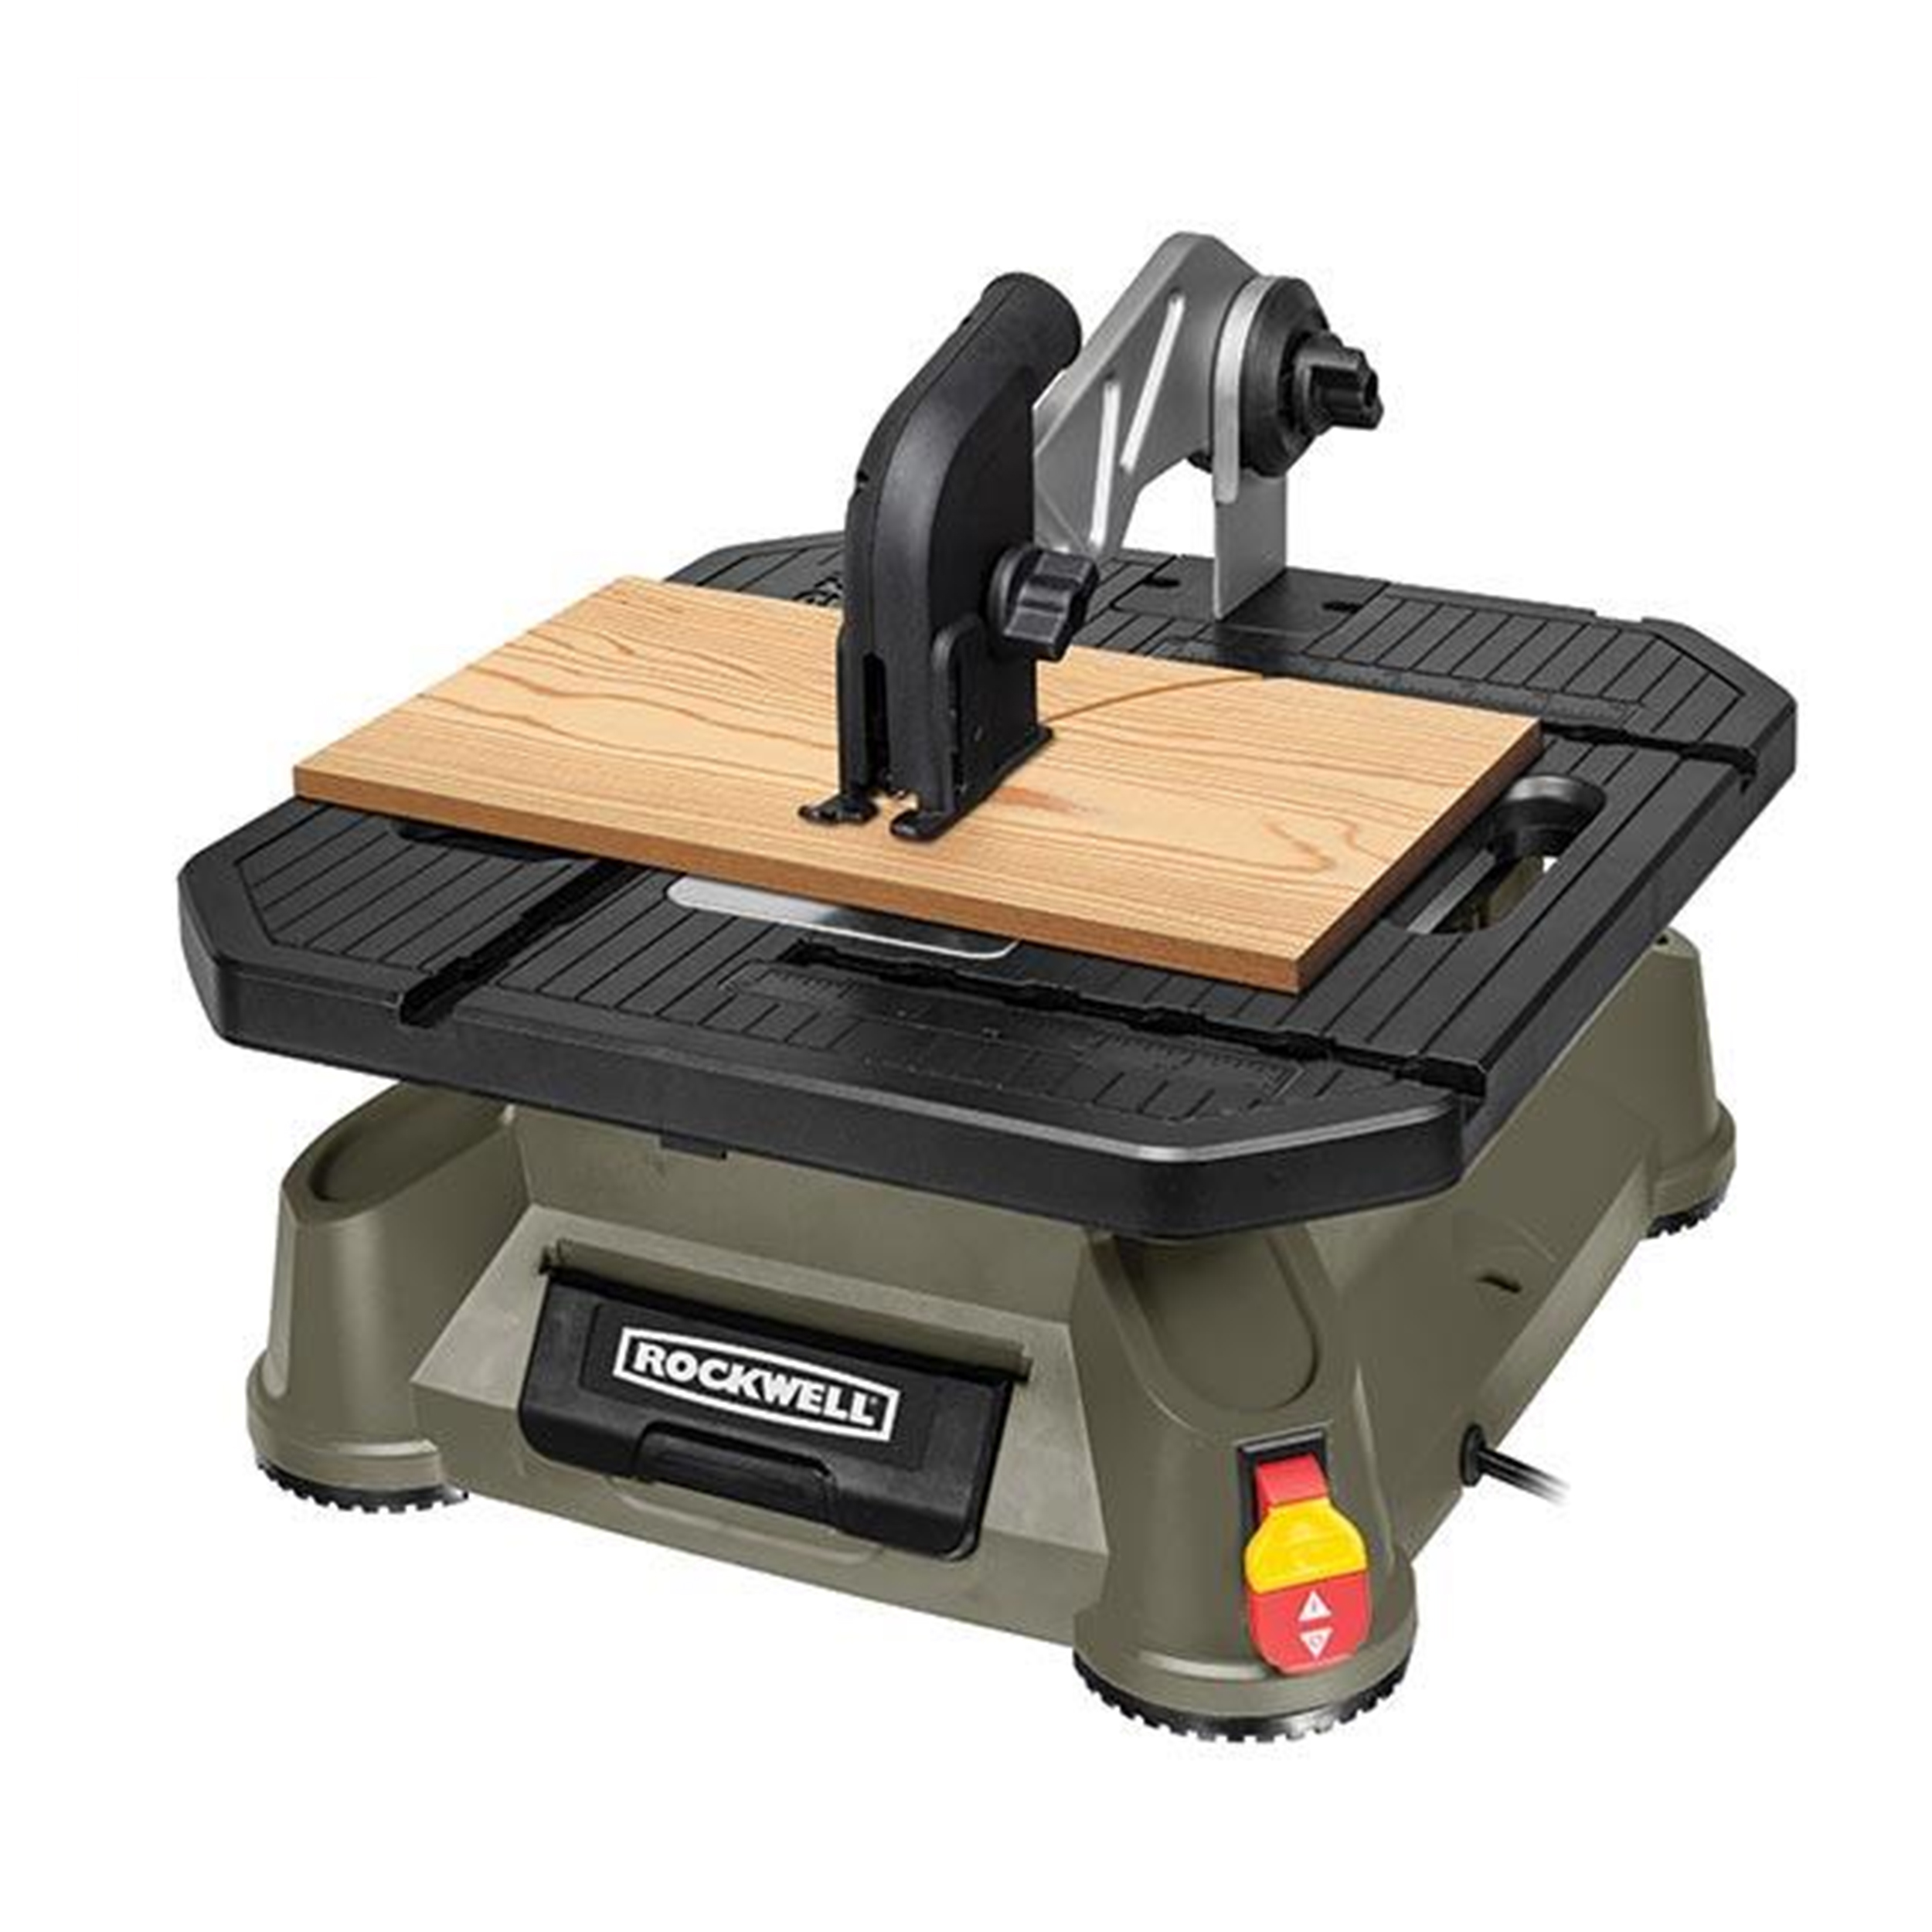 Bladerunner X2 Portable Tabletop Saw